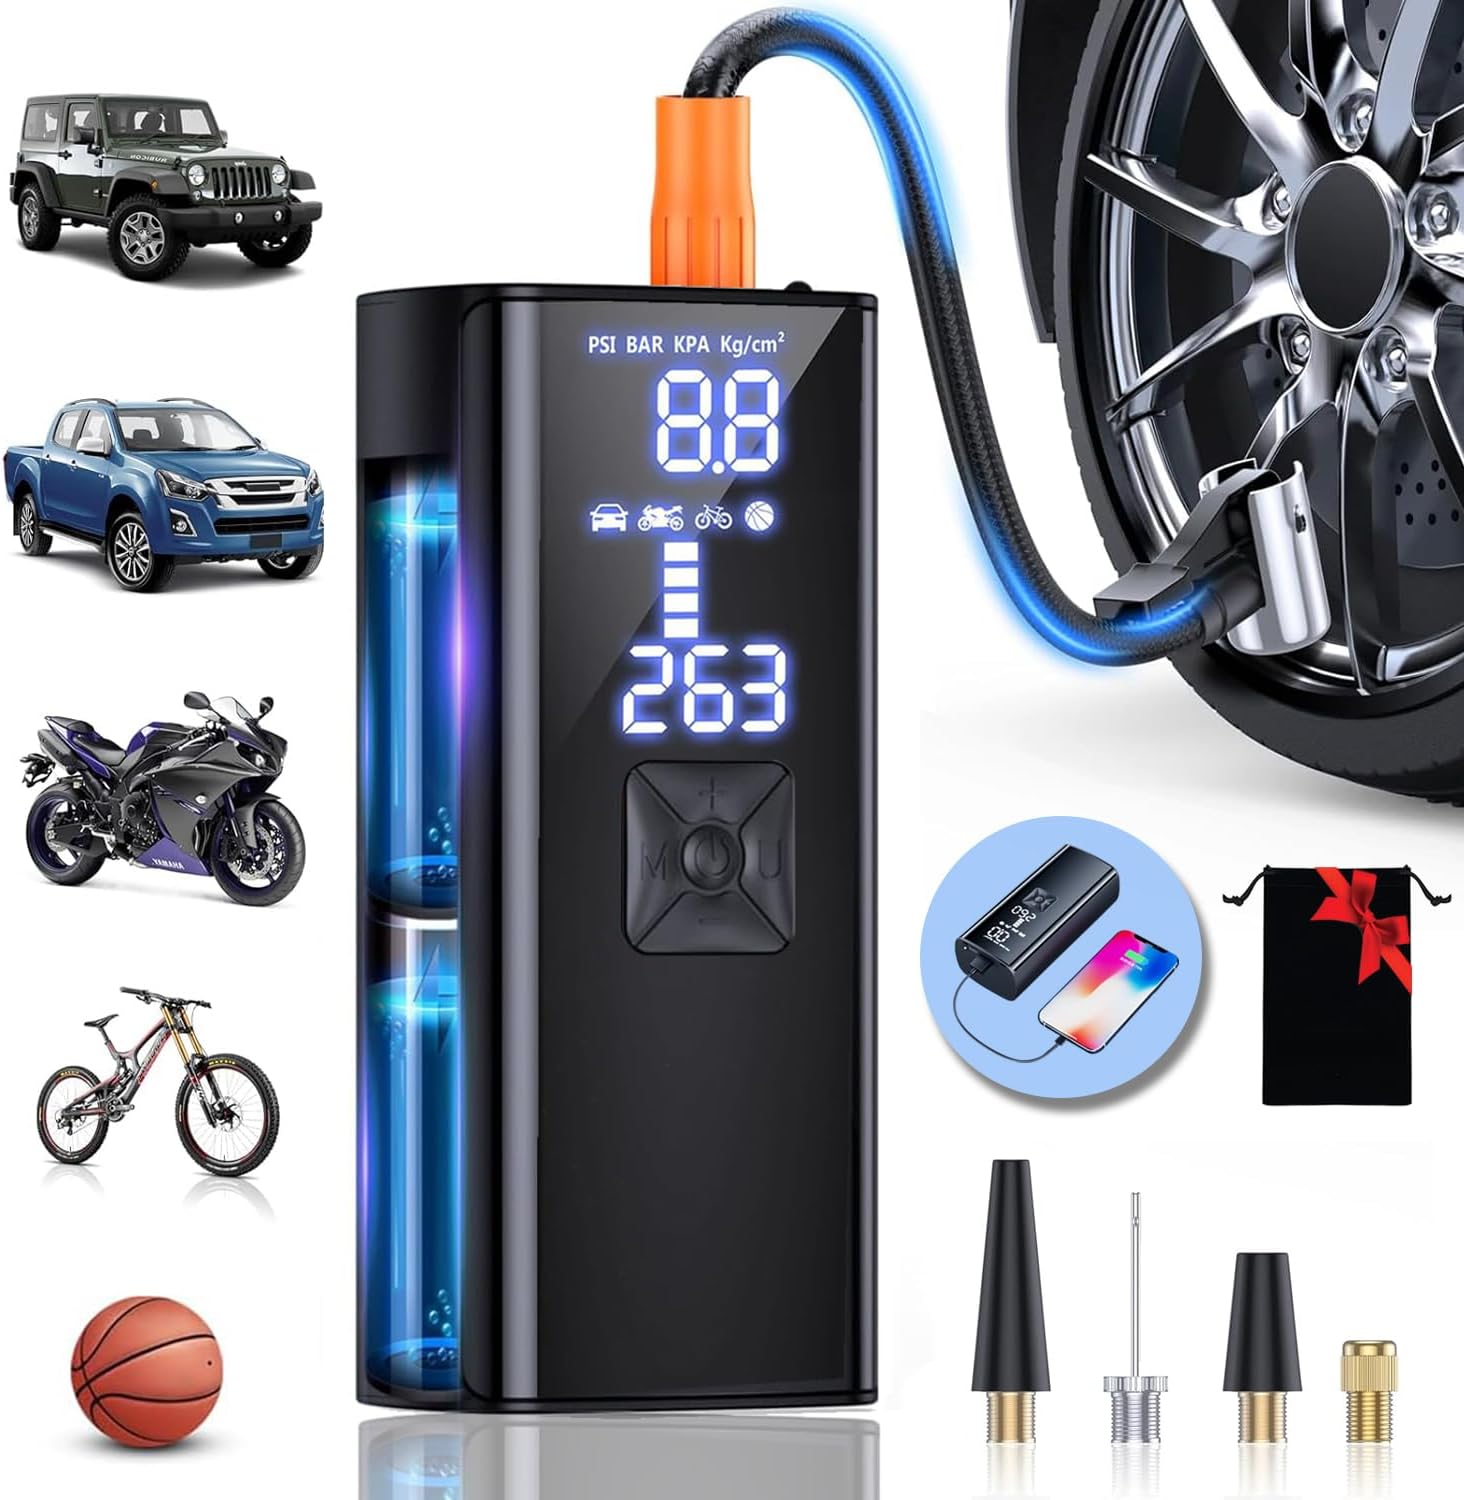 ArTea Magic Car Tire Inflator ! Big Sale with 10% Coupon !
Click the link and get it soon !